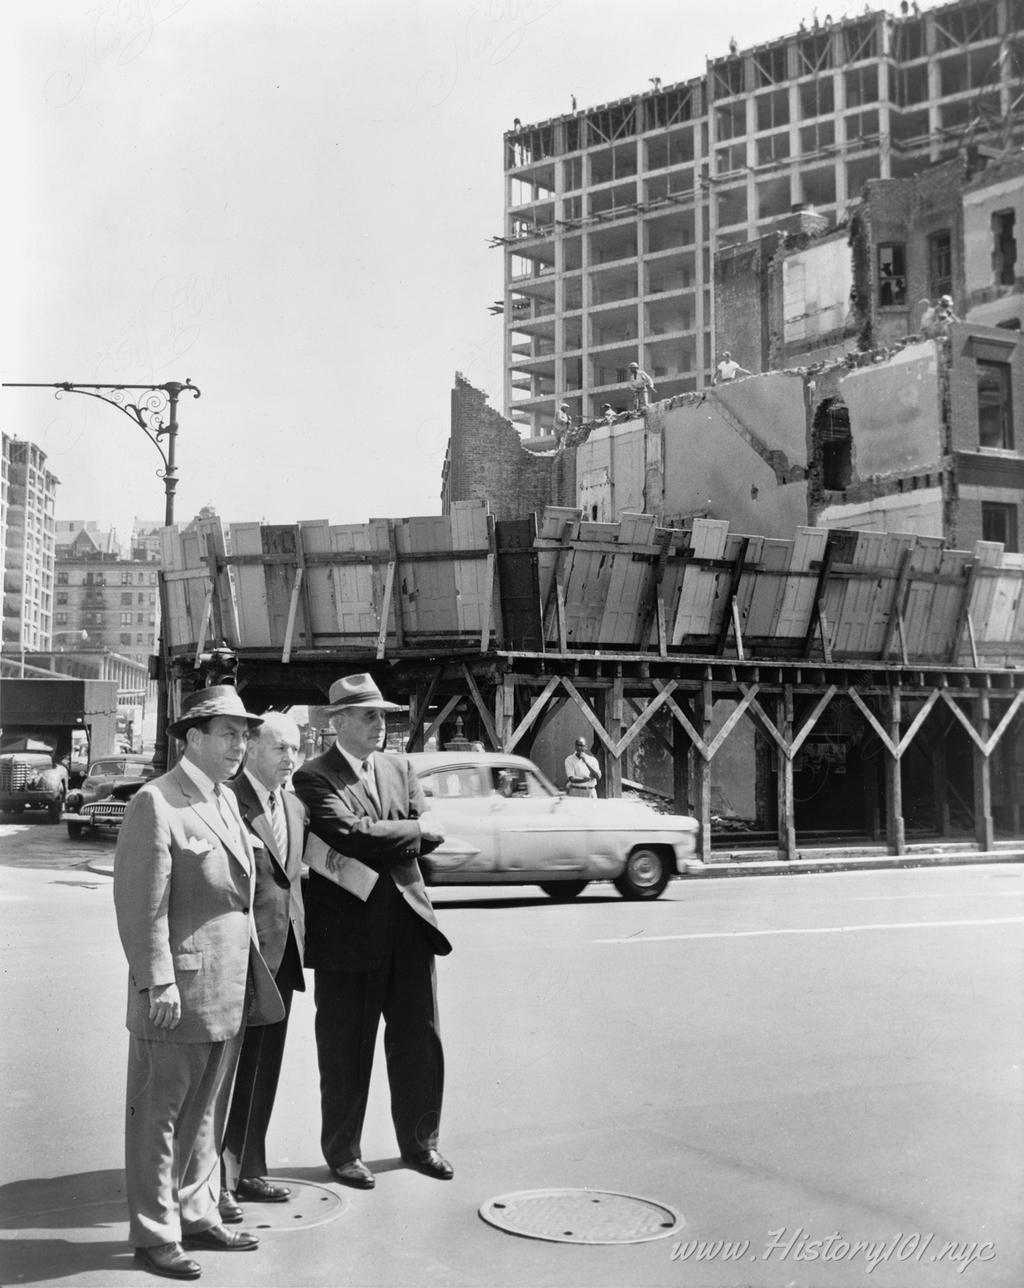 Photograph of Mayor Robert Wagner joined by Robert Moses and Frank Meistrell on a housing project tour.